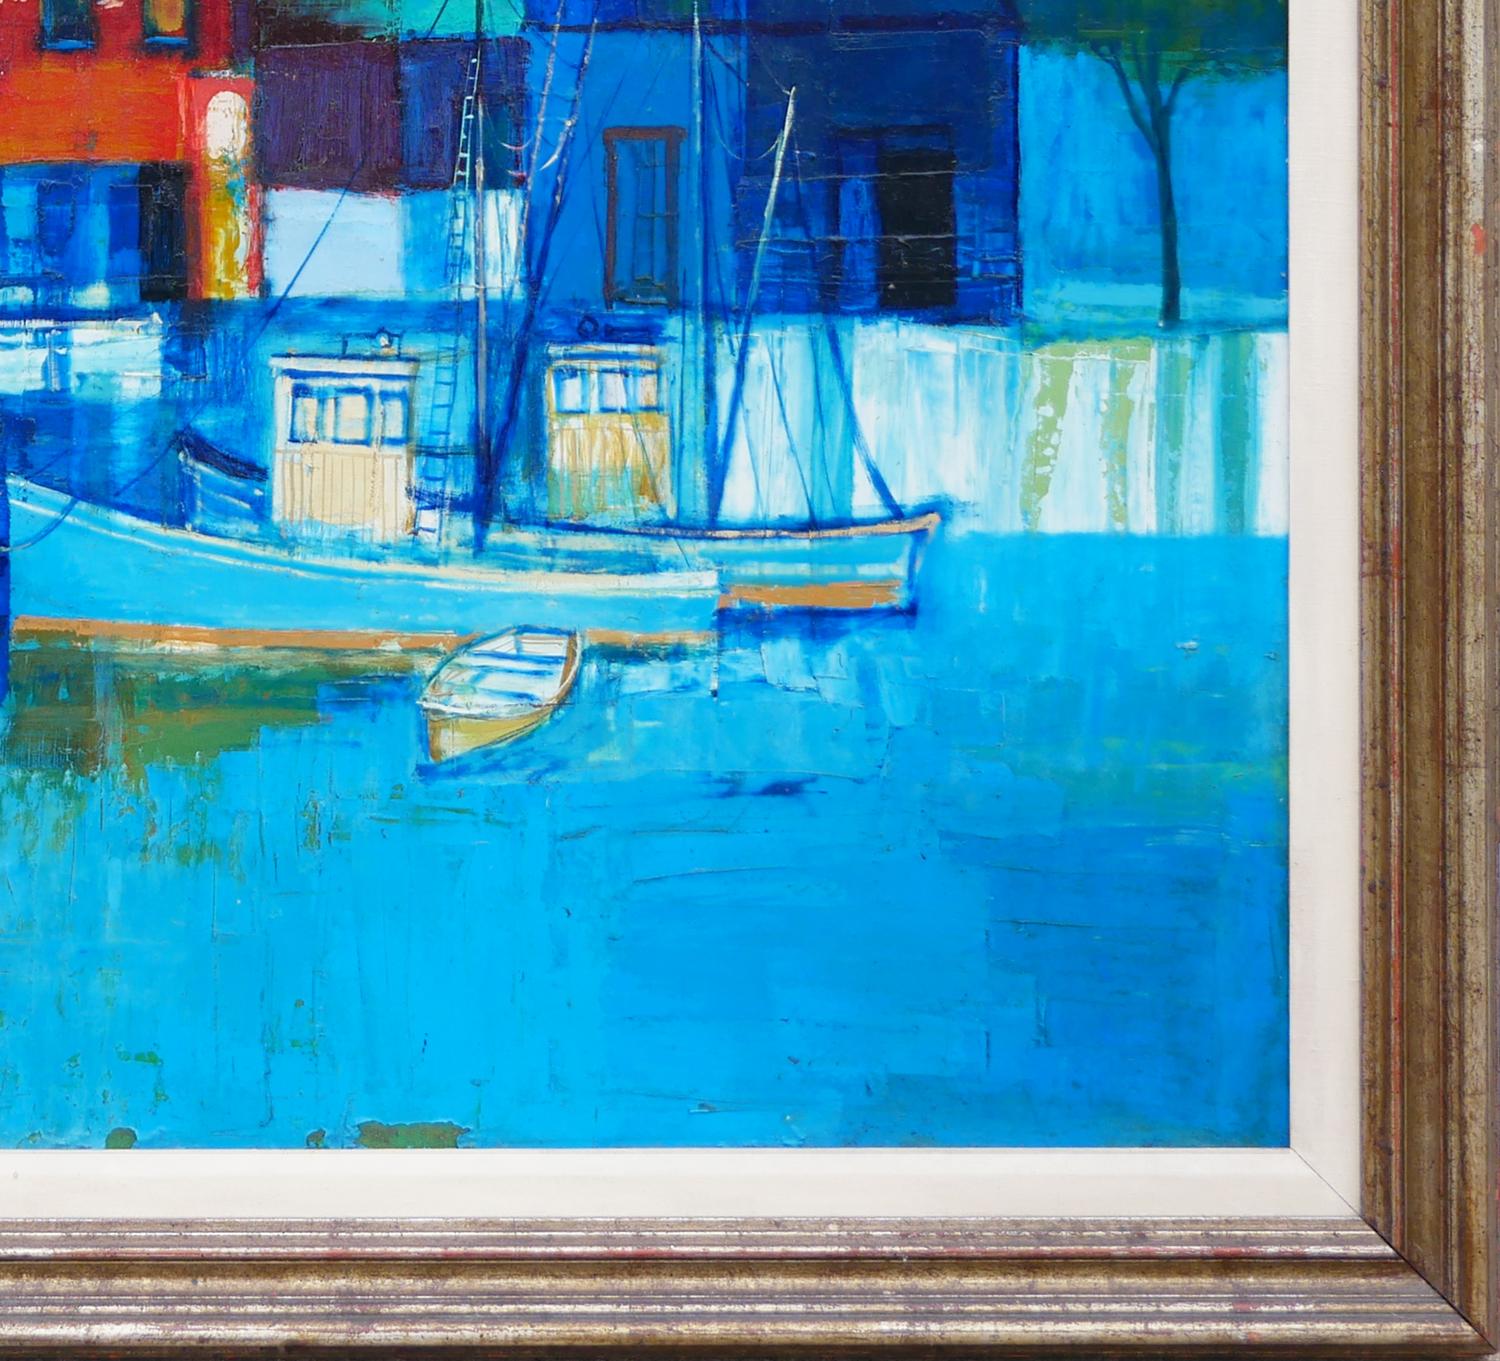 Blue-toned abstract geometric landscape painting by Houston, TX artist Herb Mears. This painting depicts a village port along a European city bound by mountains and a river. Signed by the artist in the front lower left. Currently hung in a wooden